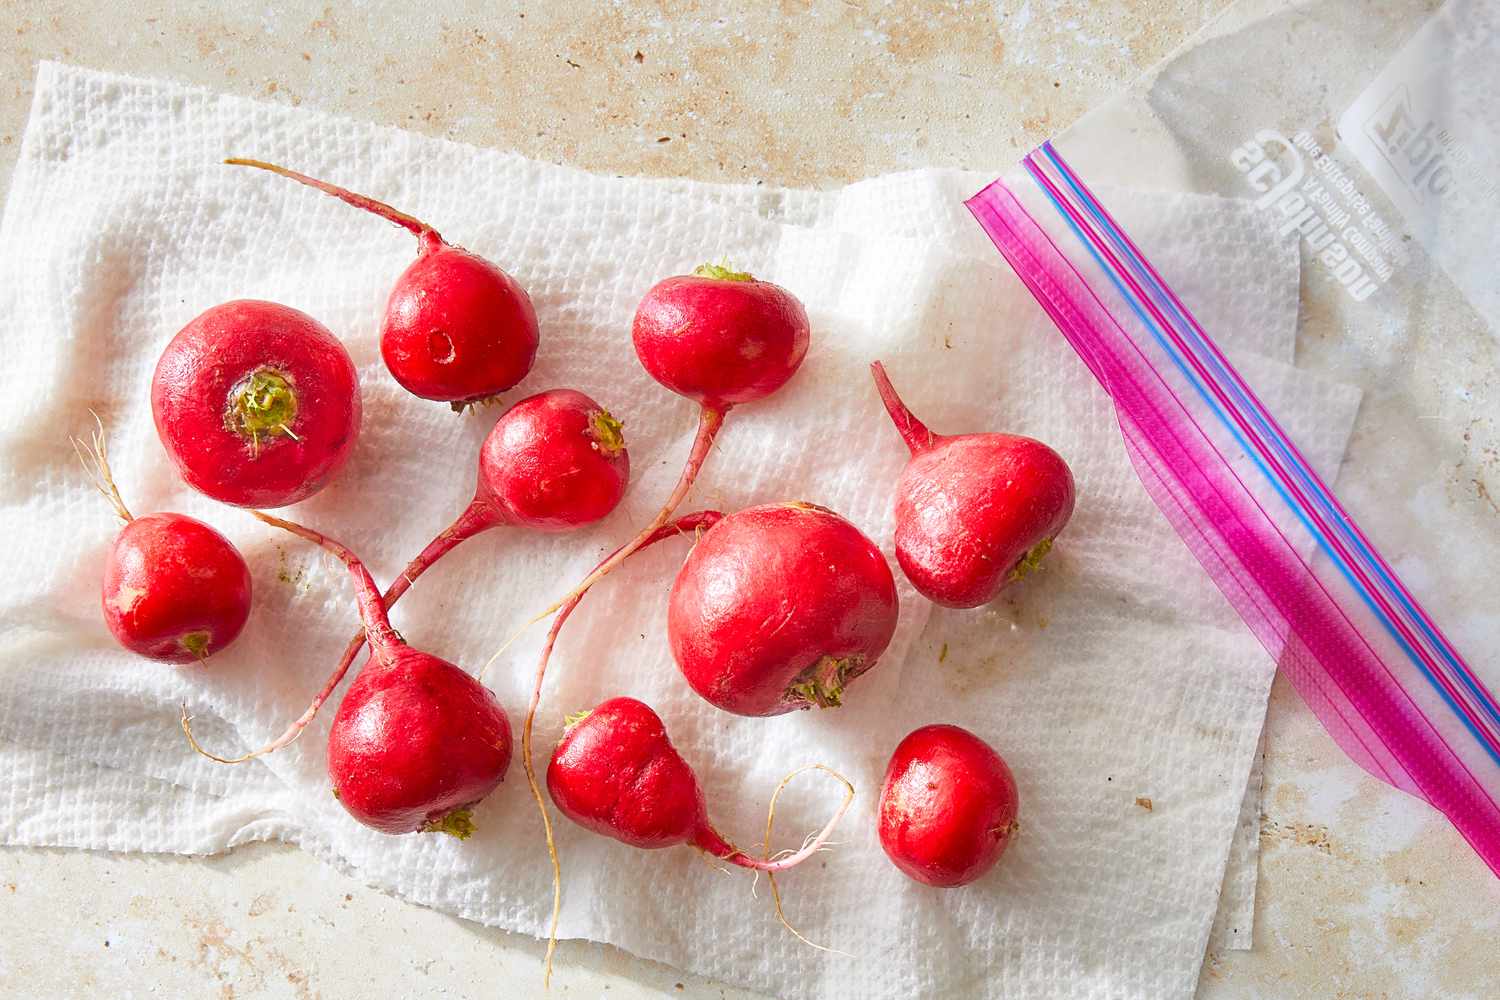 How To Store Radishes In The Fridge